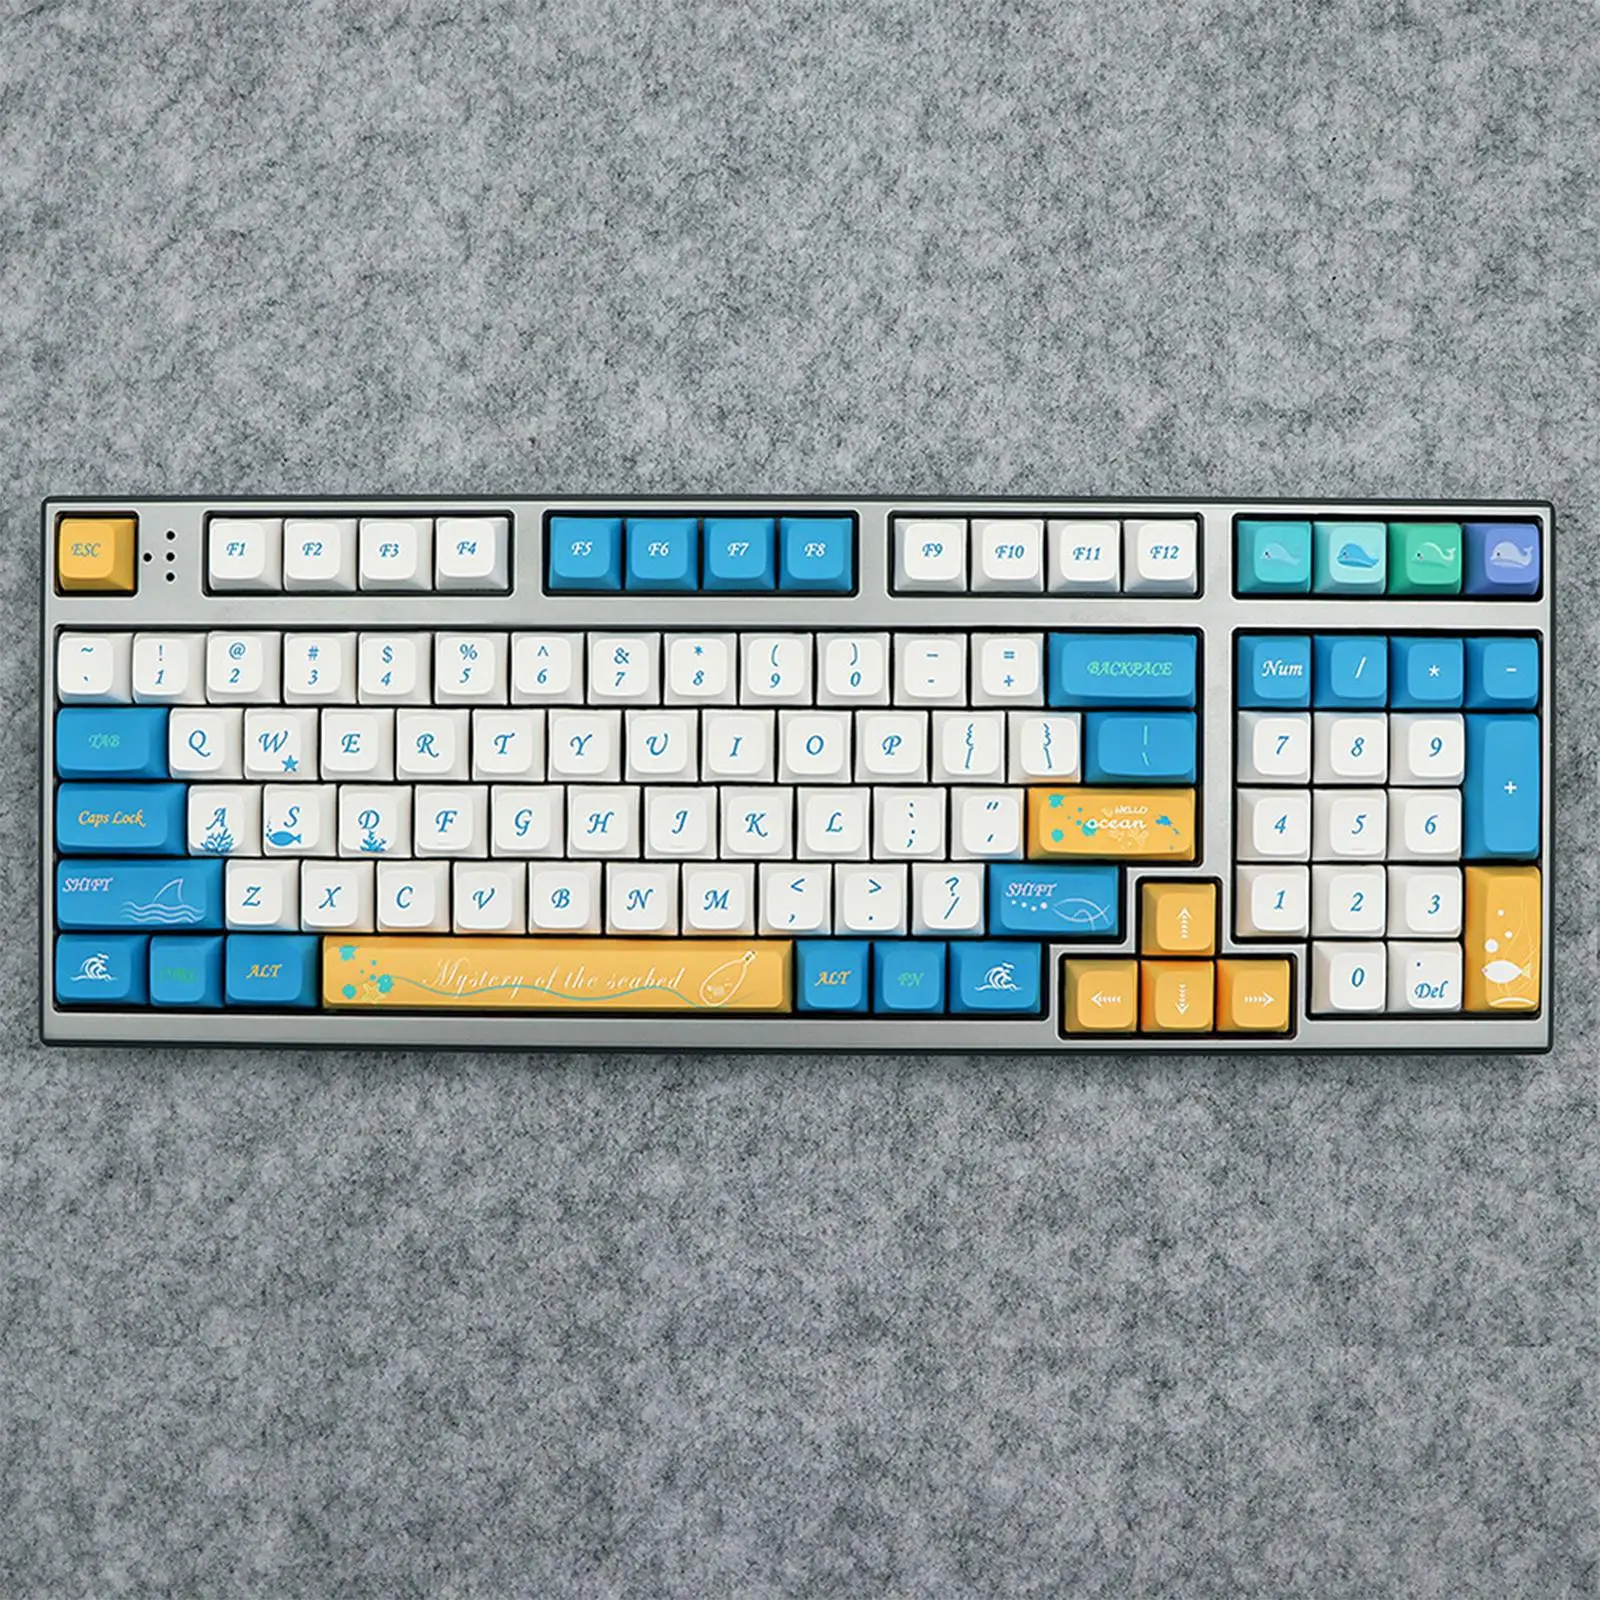 137 Keycaps Xda Profile PBT Underwater Animals Theme for Mechanical Keyboards 61 64 68 87 Keycaps Replacement Install Durable